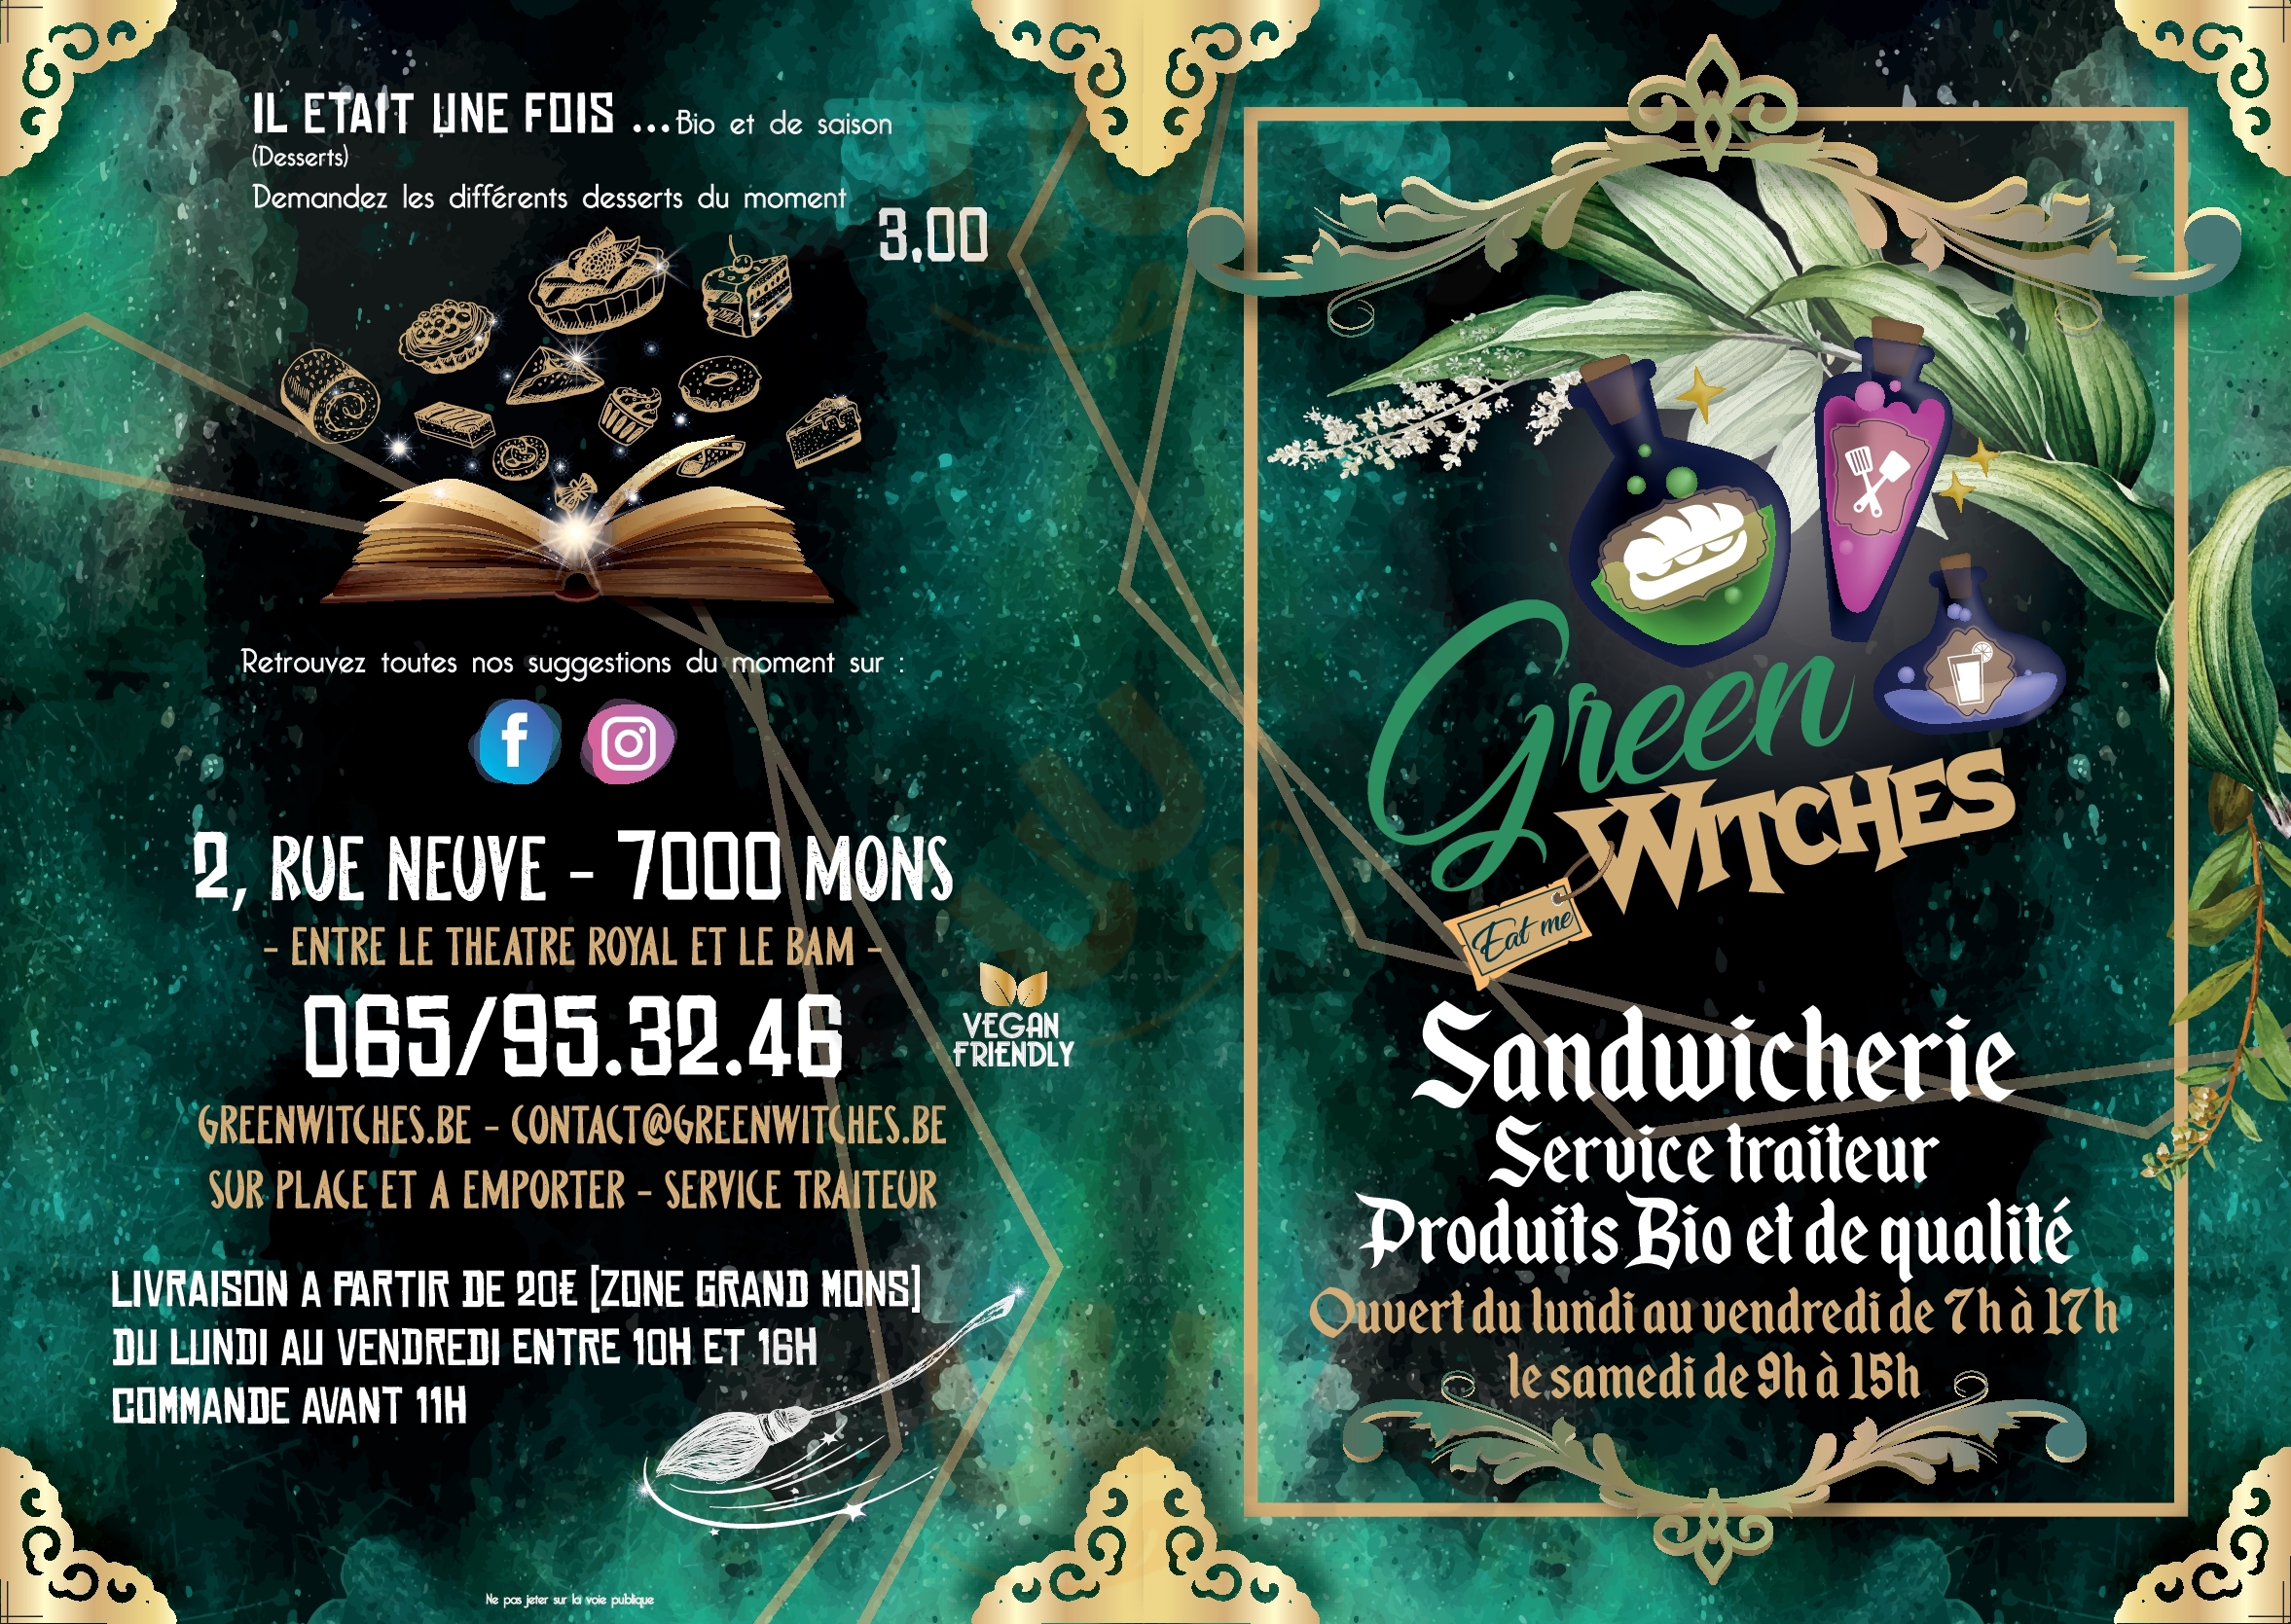 Green Witches Mons Menu - 1